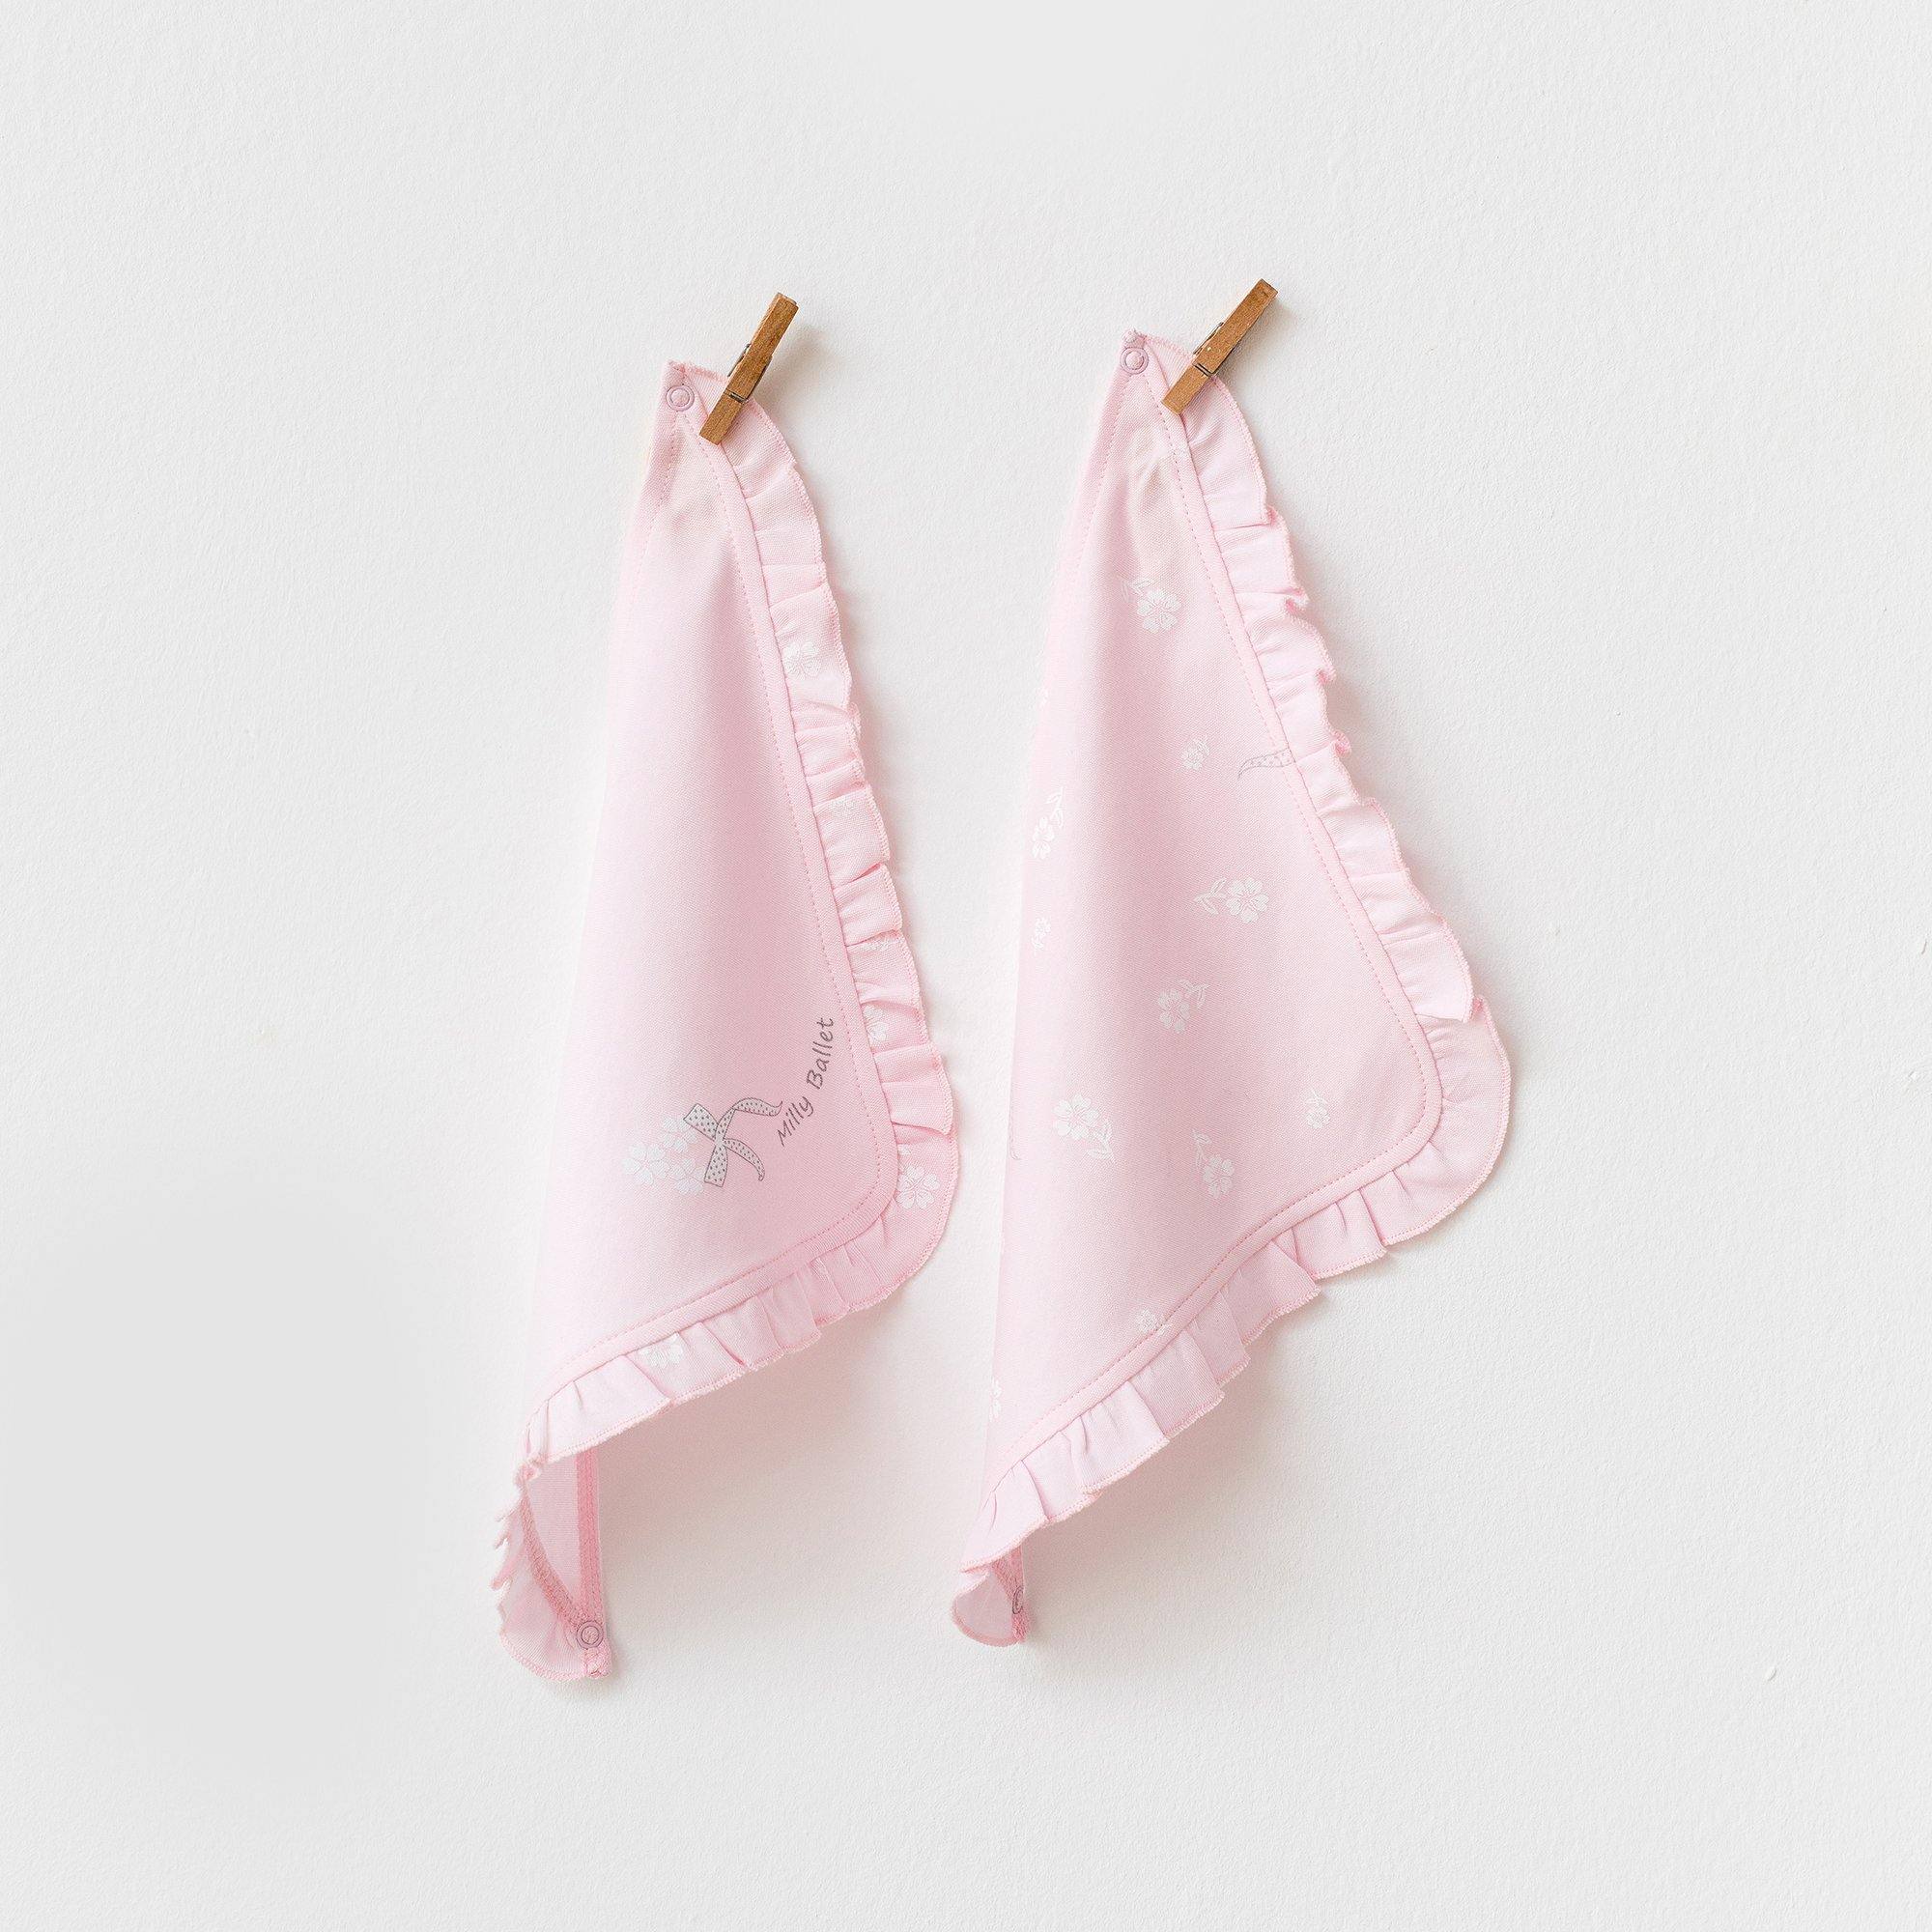 Milly Ballet - 2 Pieces Bibs Set - Milly Ballet - 2 Pieces Bibs Set - Default Title - Andywawa - Melymod